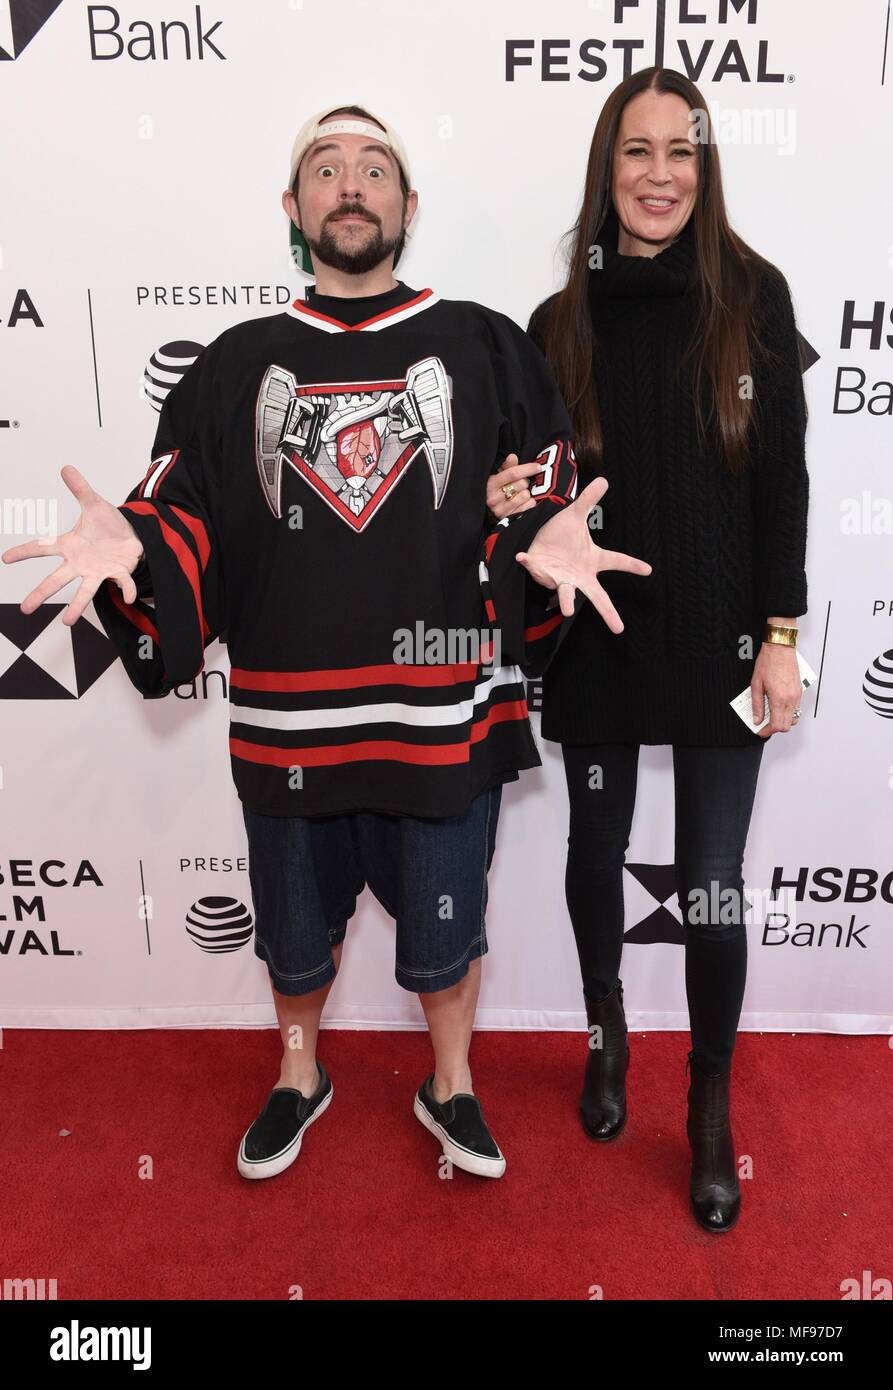 New York, NY, USA. 24th Apr, 2018. Kevin Smith, Jennifer Schwalbach Smith at arrivals for ALL THESE SMALL MOMENTS Premiere at the Tribeca Film Festival 2018, School of Visual Arts (SVA) Theatre, New York, NY April 24, 2018. Credit: Derek Storm/Everett Collection/Alamy Live News Stock Photo